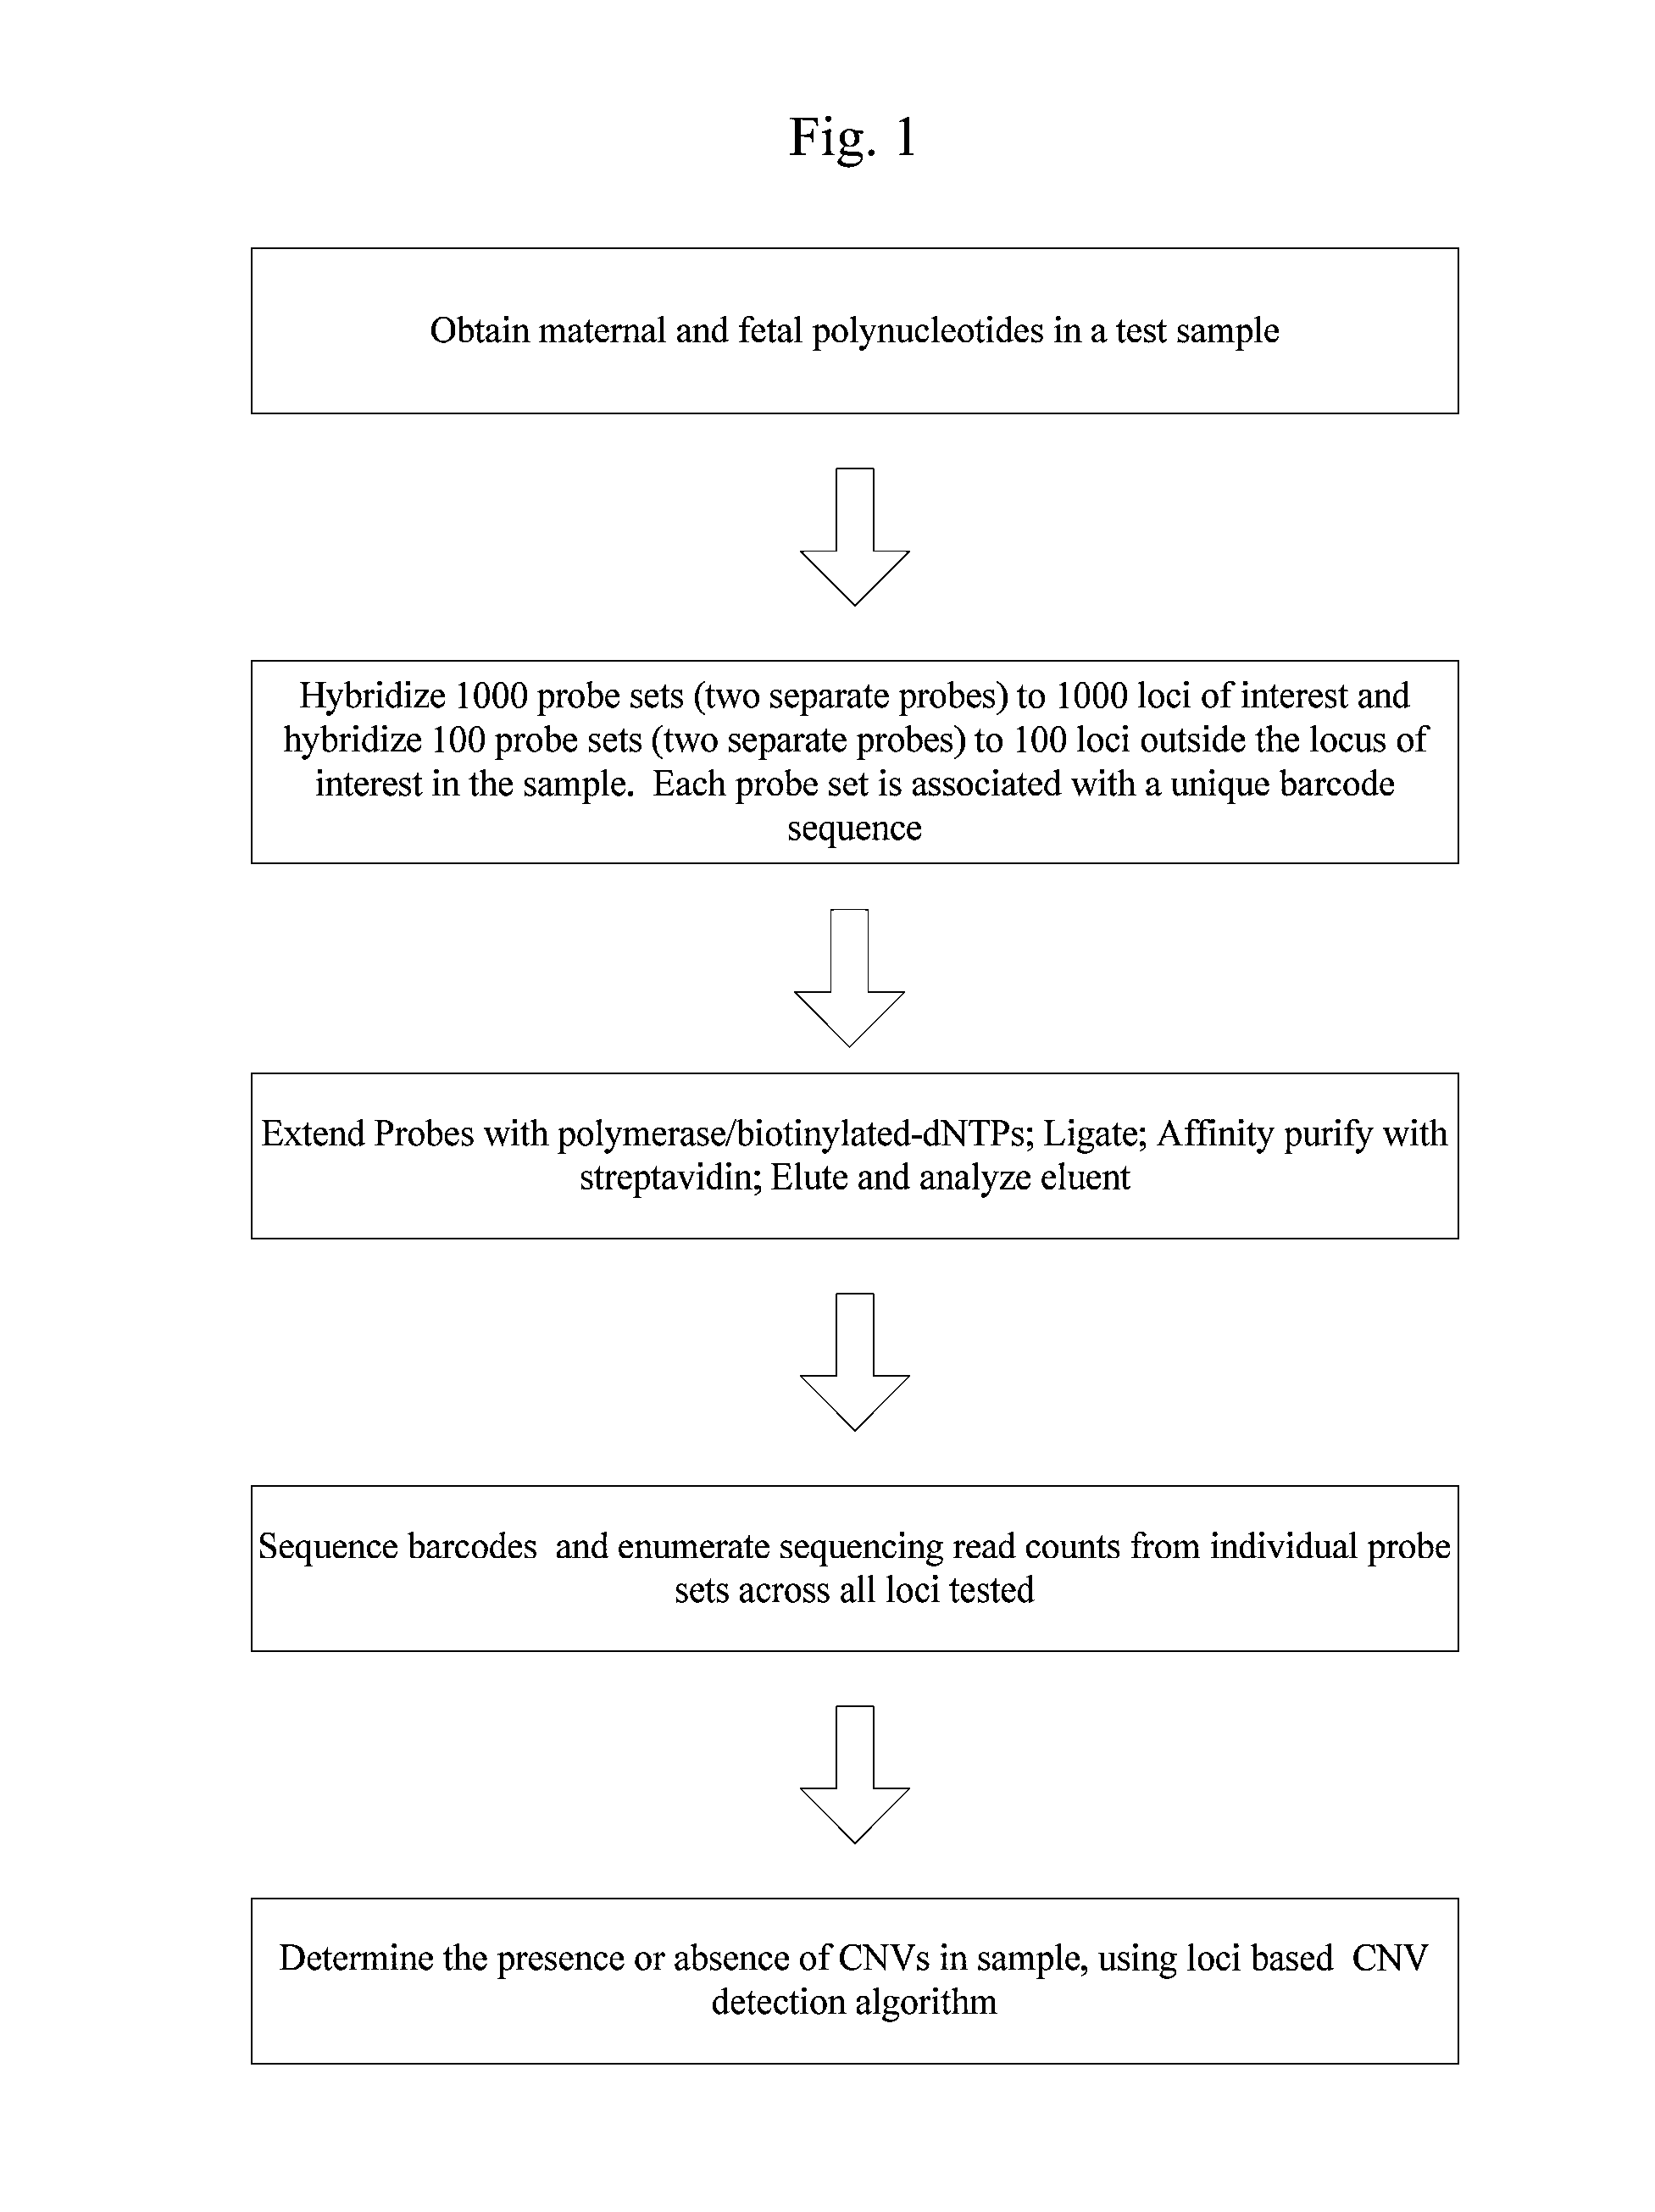 Systems and methods for prenatal genetic analysis